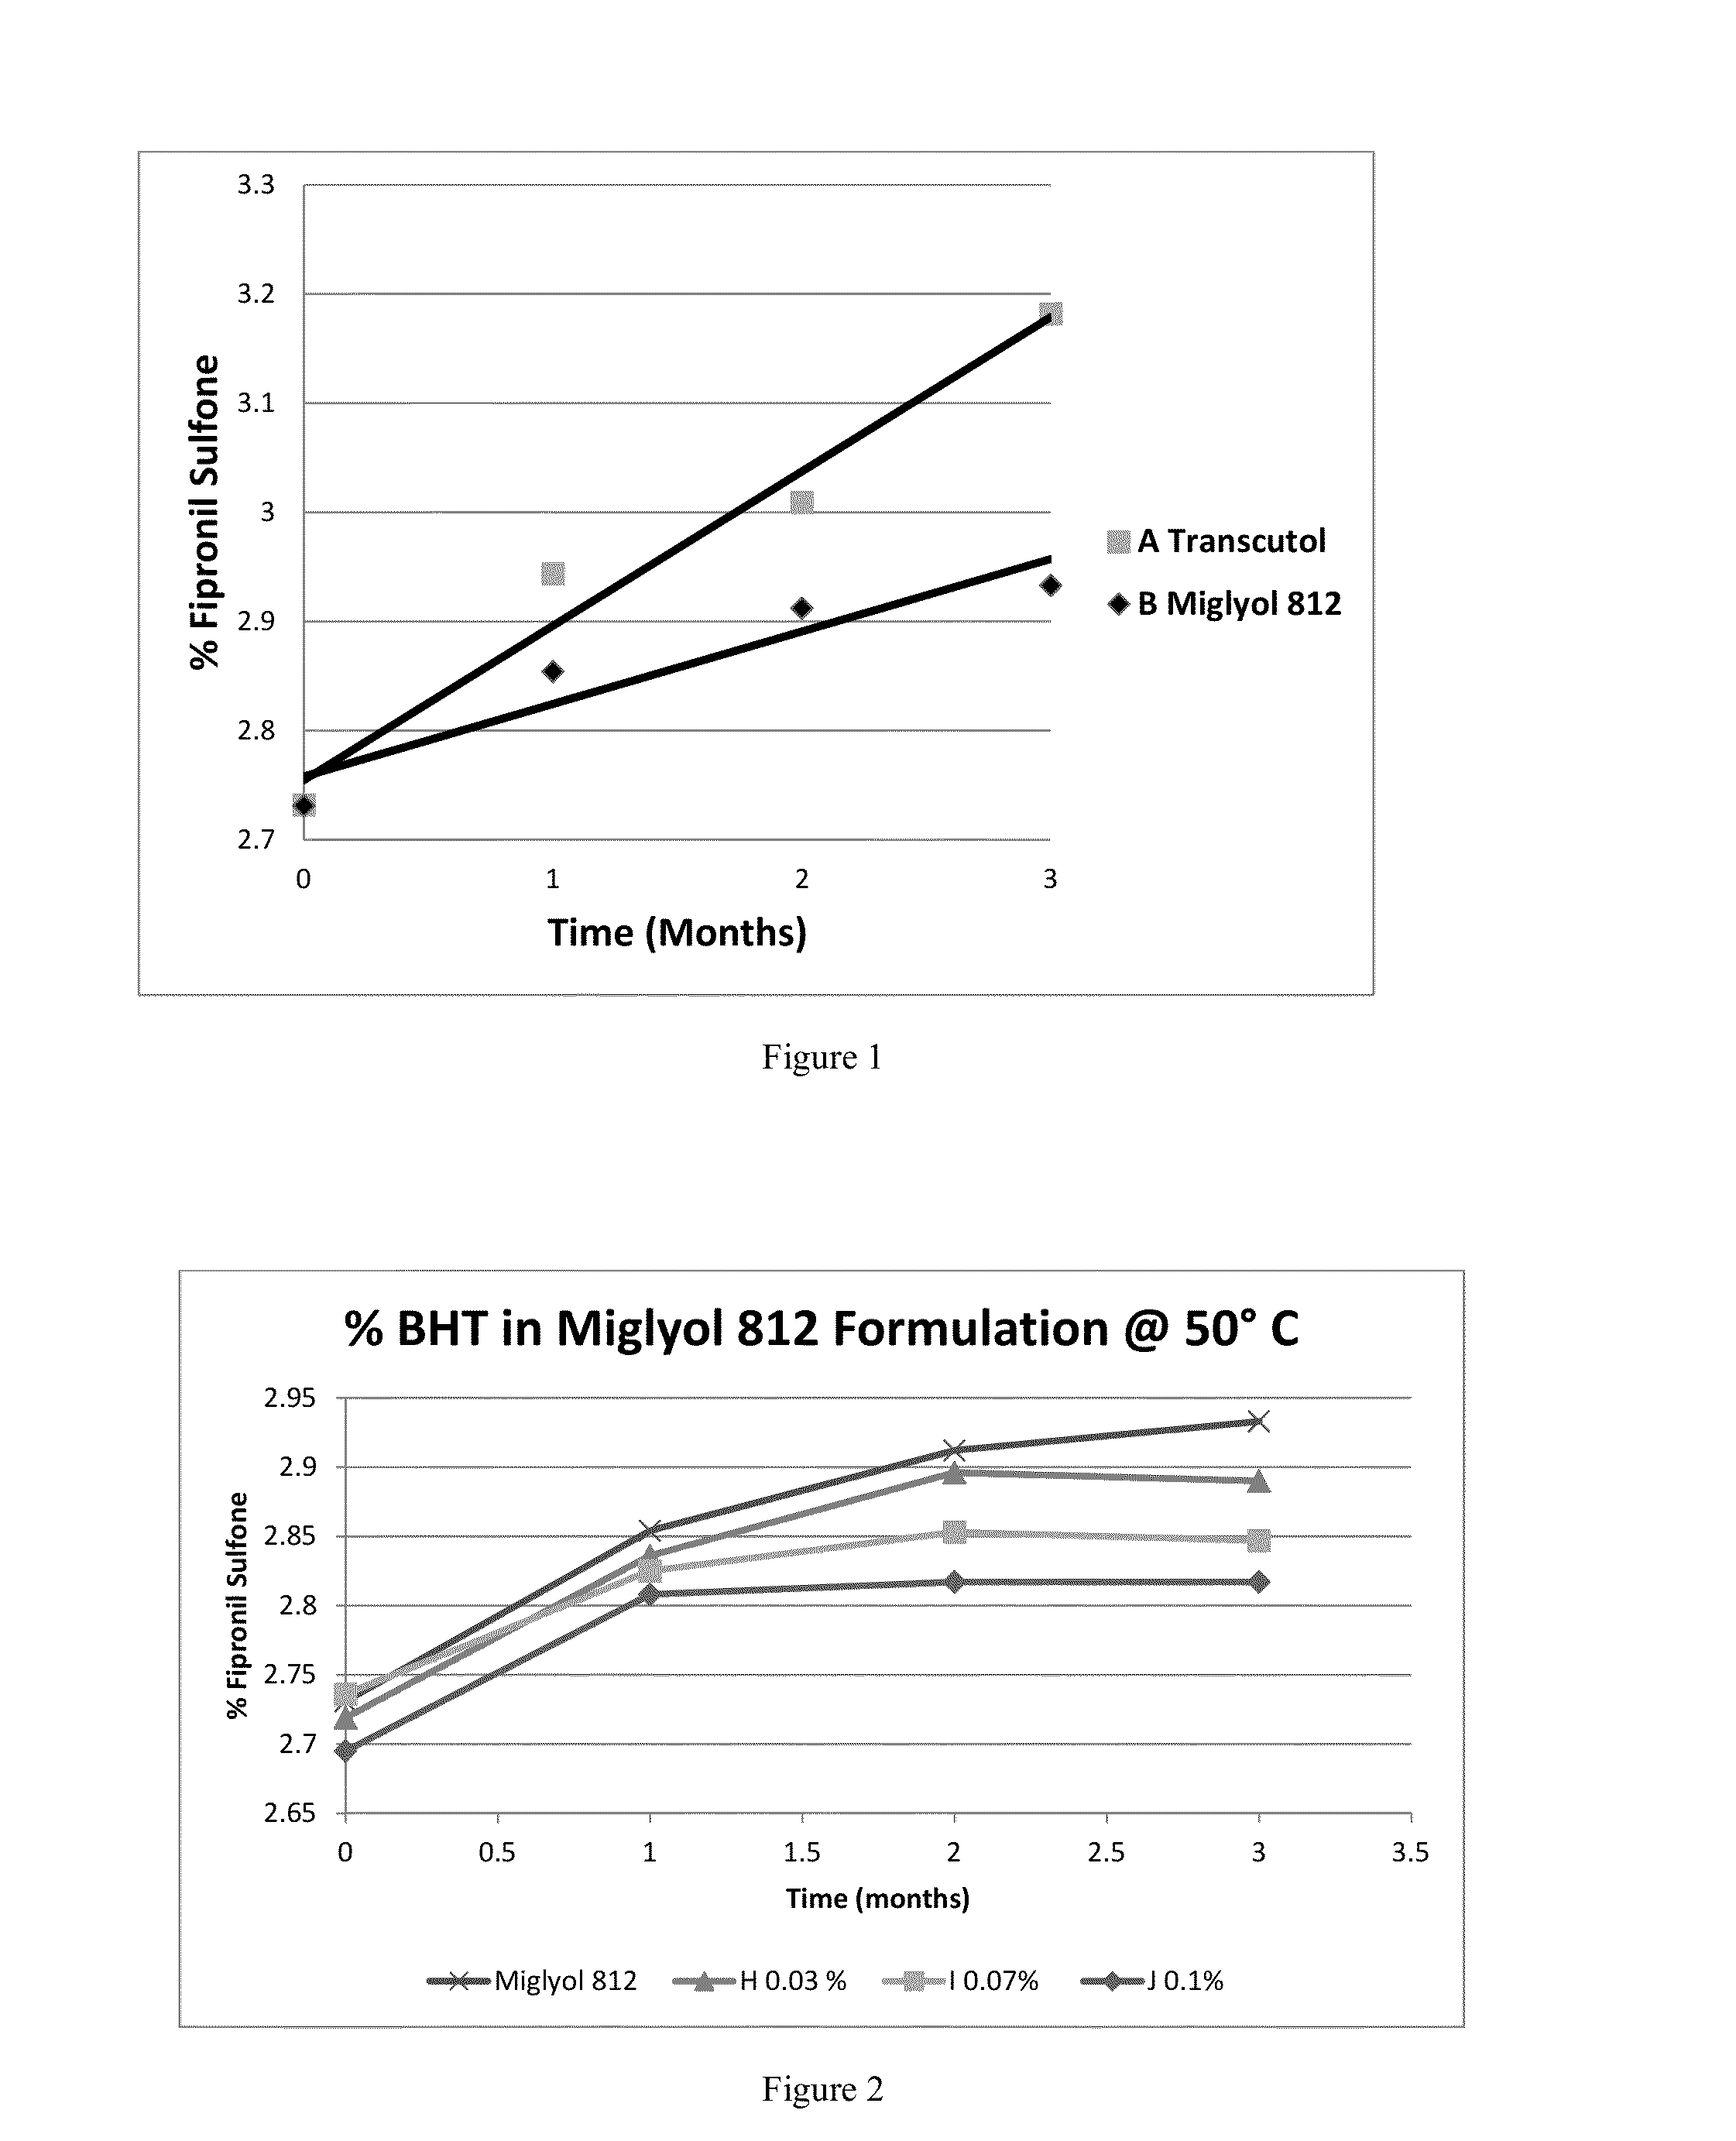 Topical compositions comprising fipronil and permethrin and methods of use